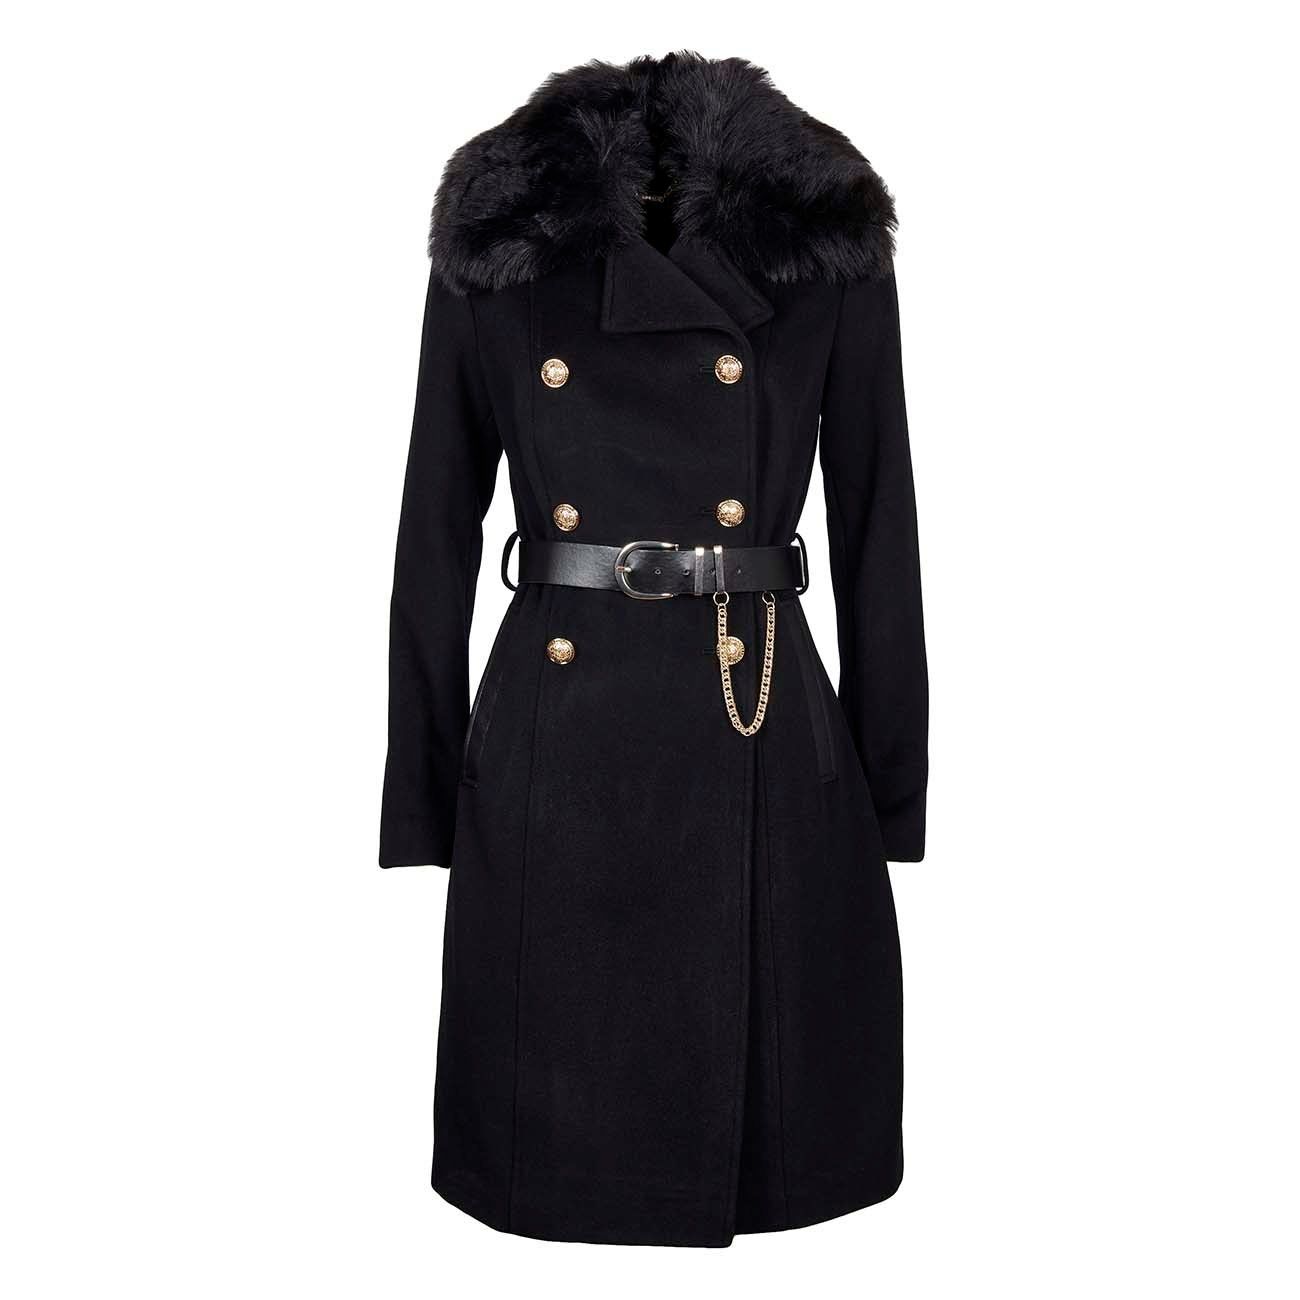 GUESS DOUBLE BREASTED COAT COLLAR AND BELT Woman Nero | Mascheroni Sportswear